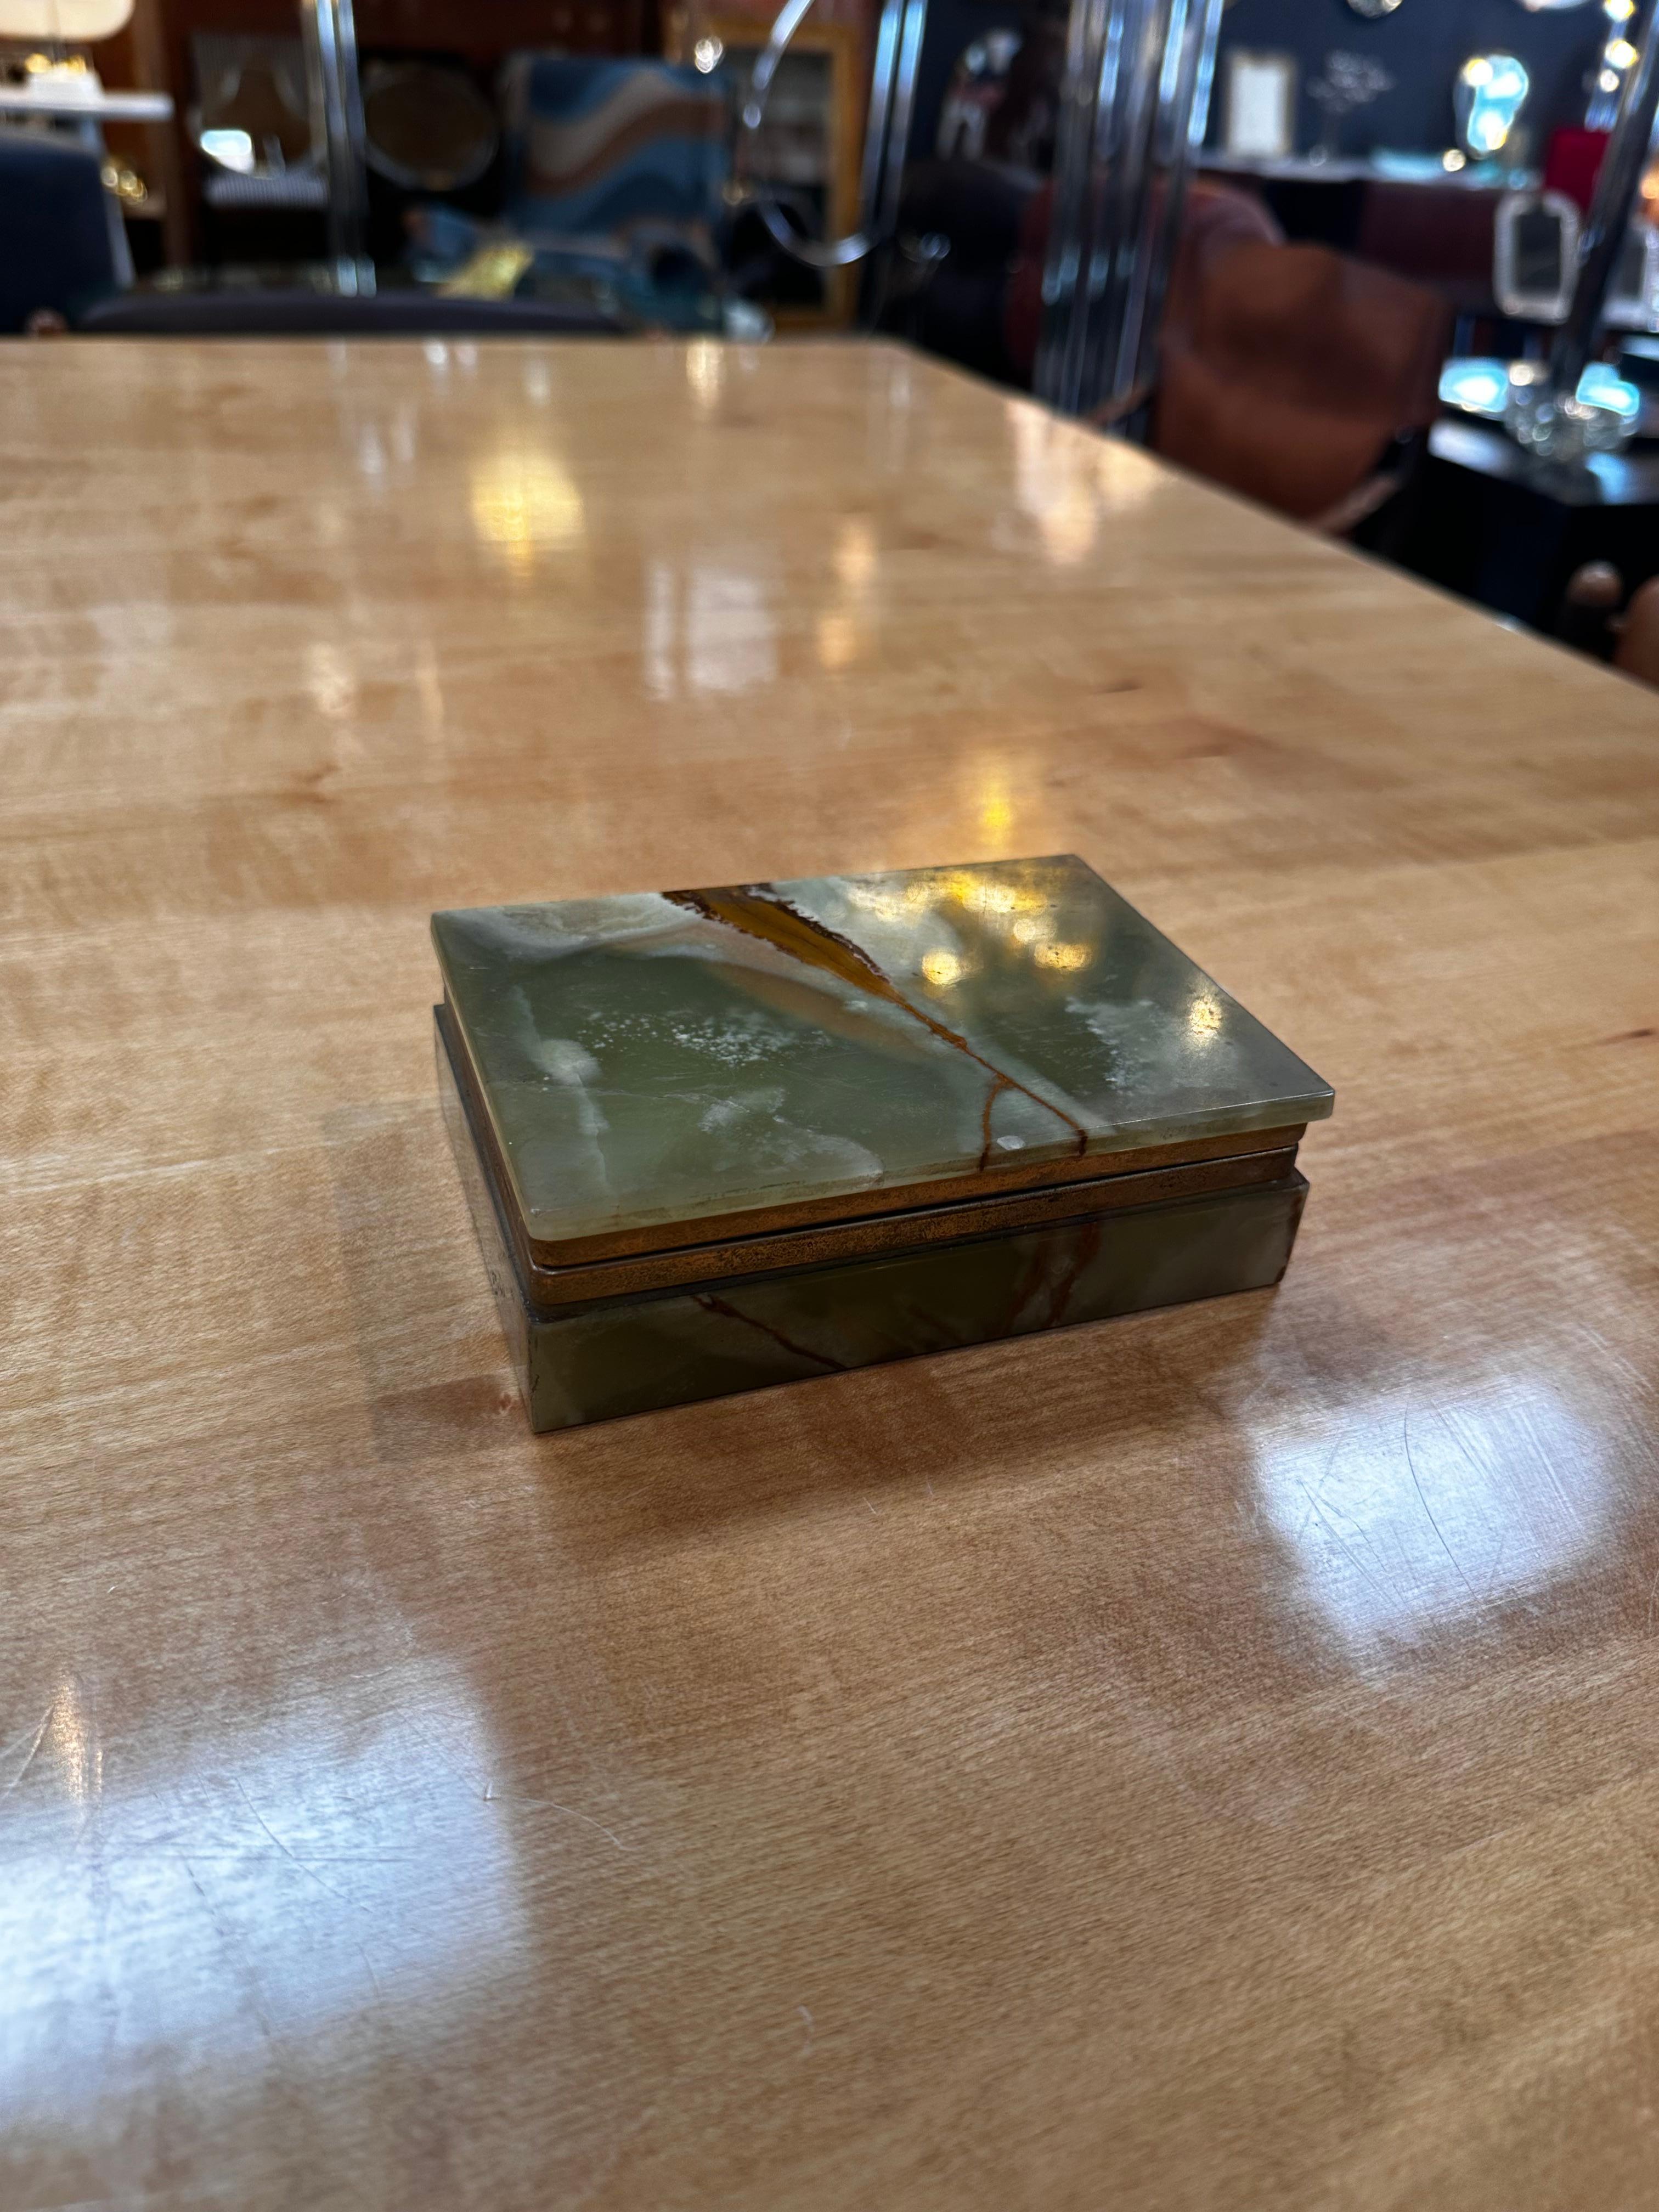 A Vintage Italian Marble and Brass Decorative Box from the 1970s is a sophisticated piece of functional art. This box seamlessly combines luxurious marble with brass accents, showcasing the elegant design aesthetics of 1970s Italian decor.

